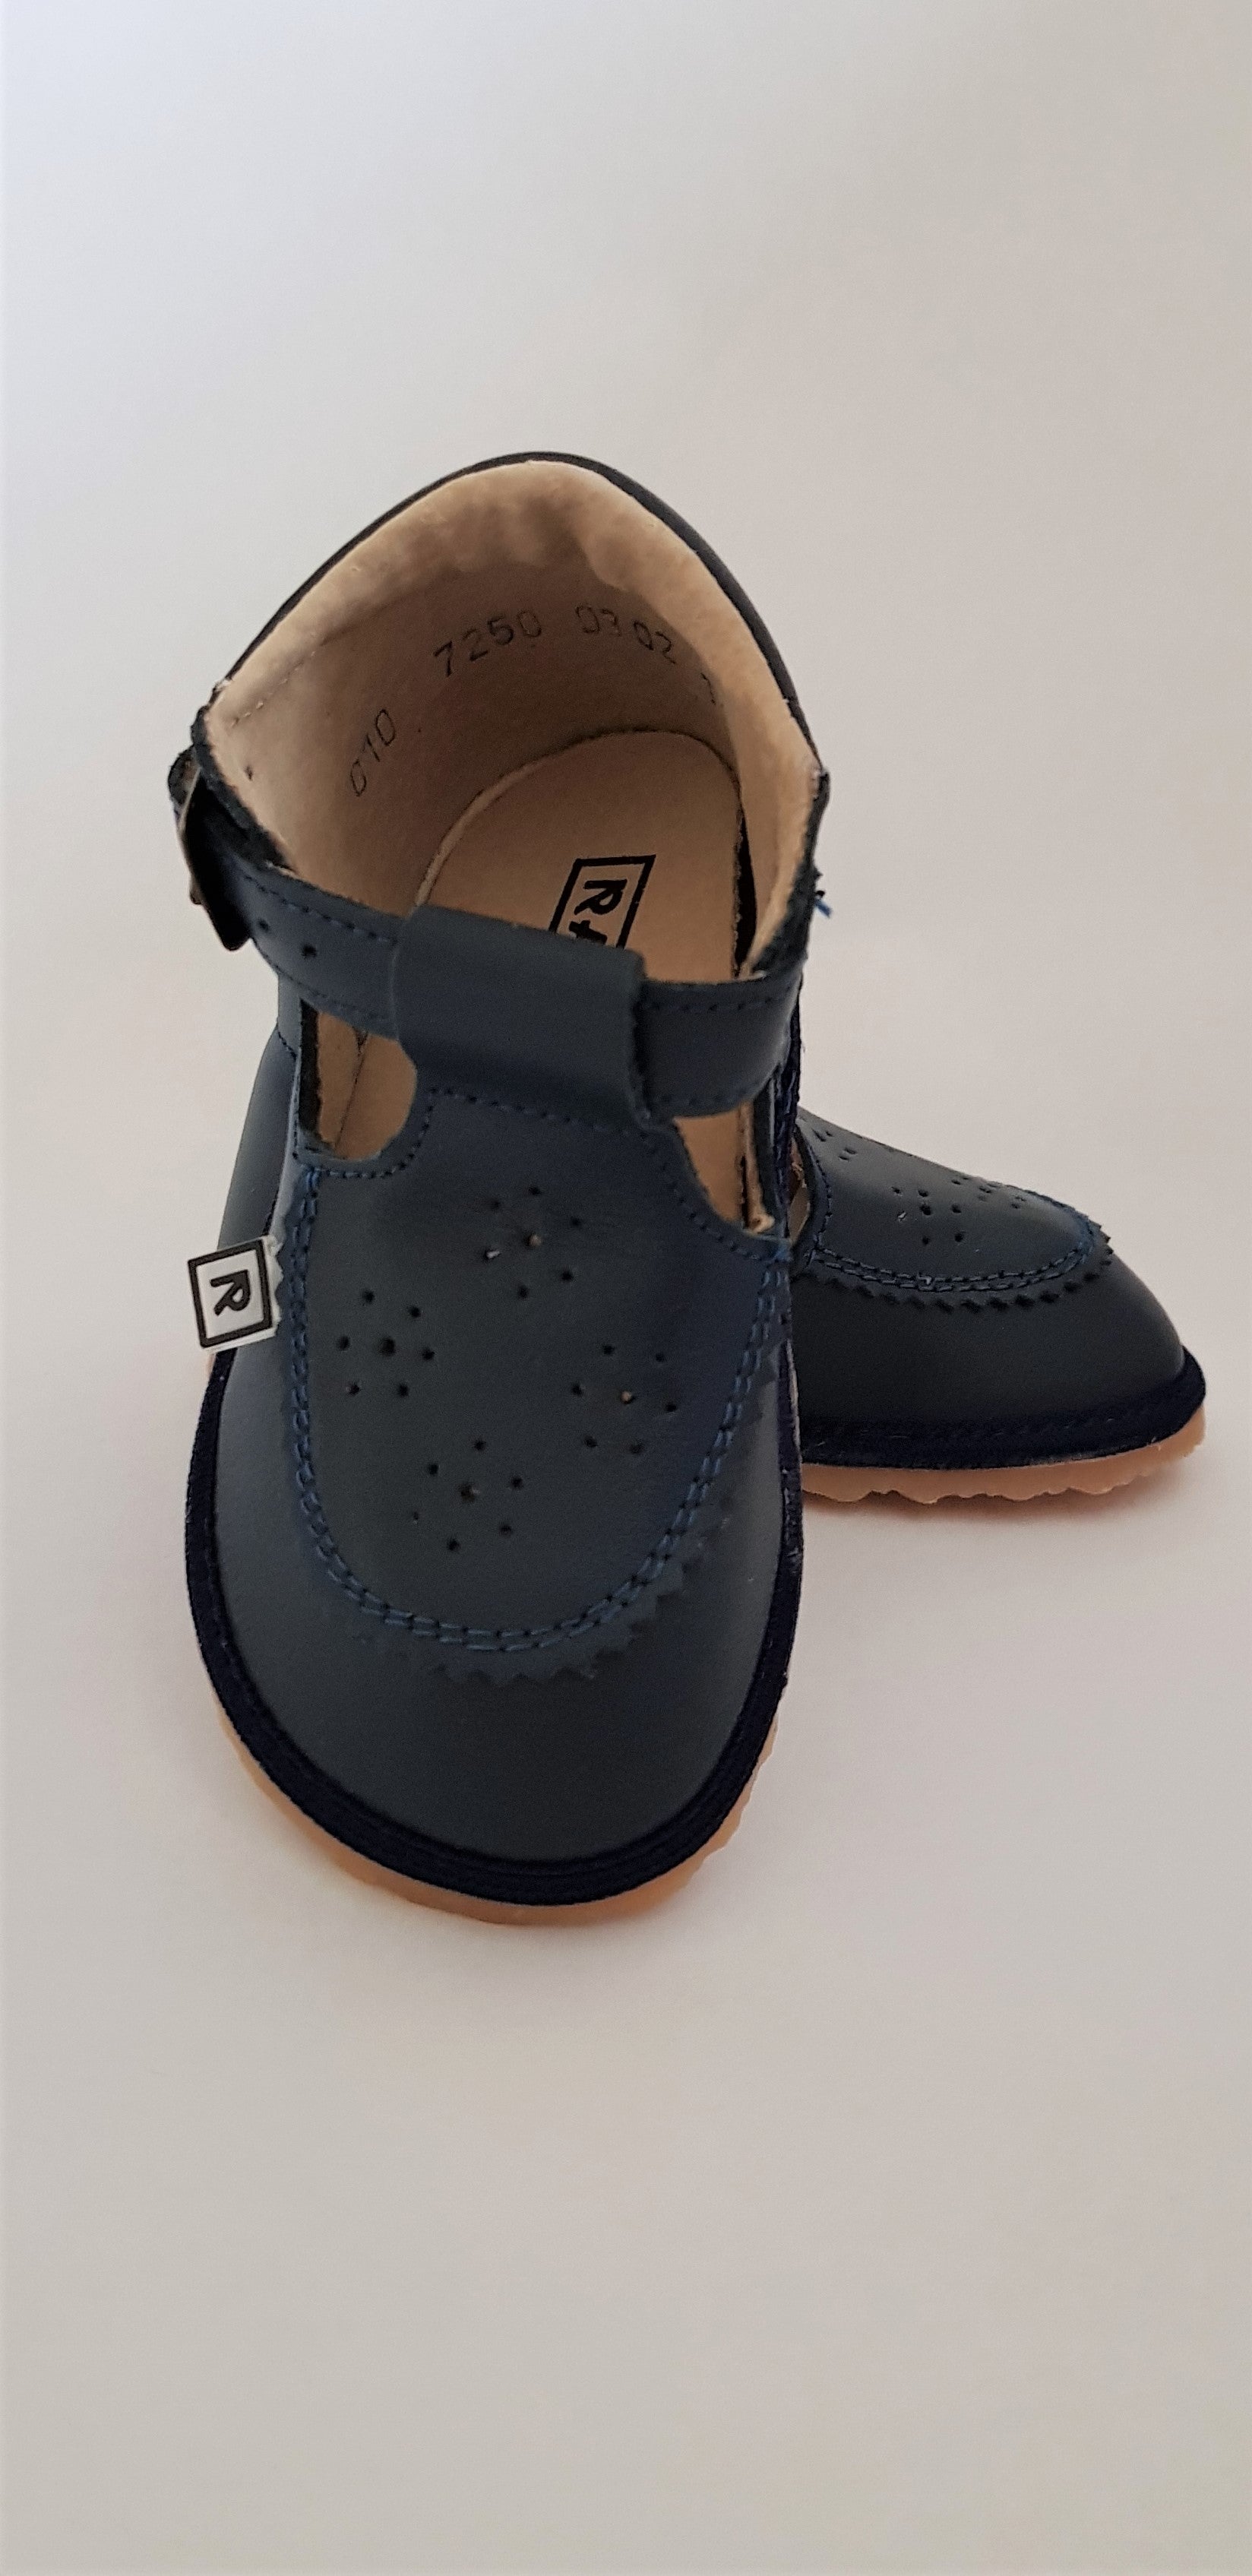 Navy first walking t-bar shoes for babies or toddlers with anatomically shaped toe box made from soft leather